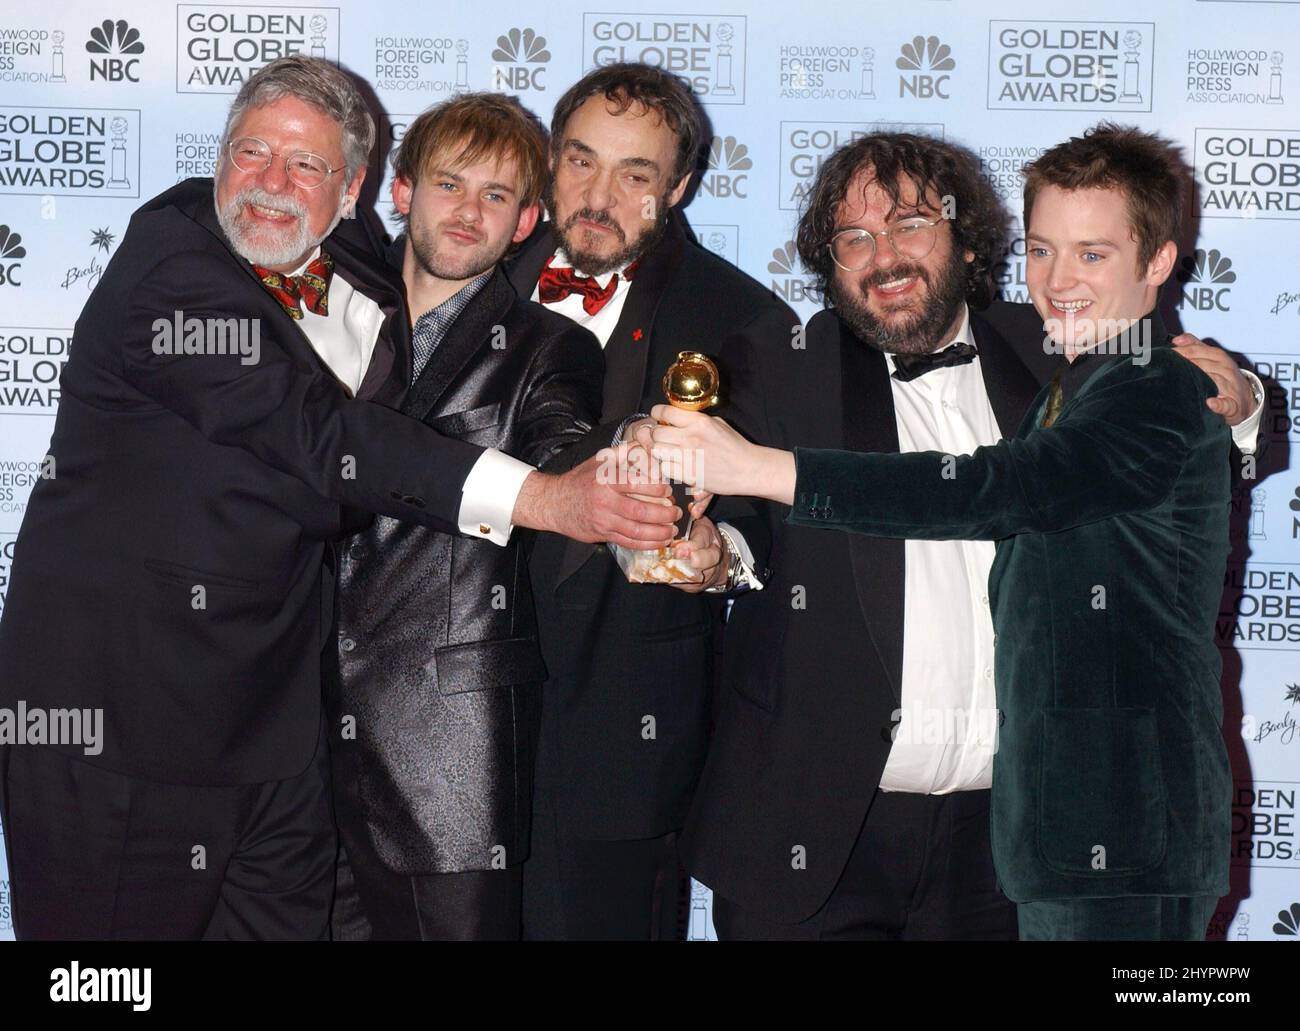 Lord rings cast hi-res stock photography and images - Alamy